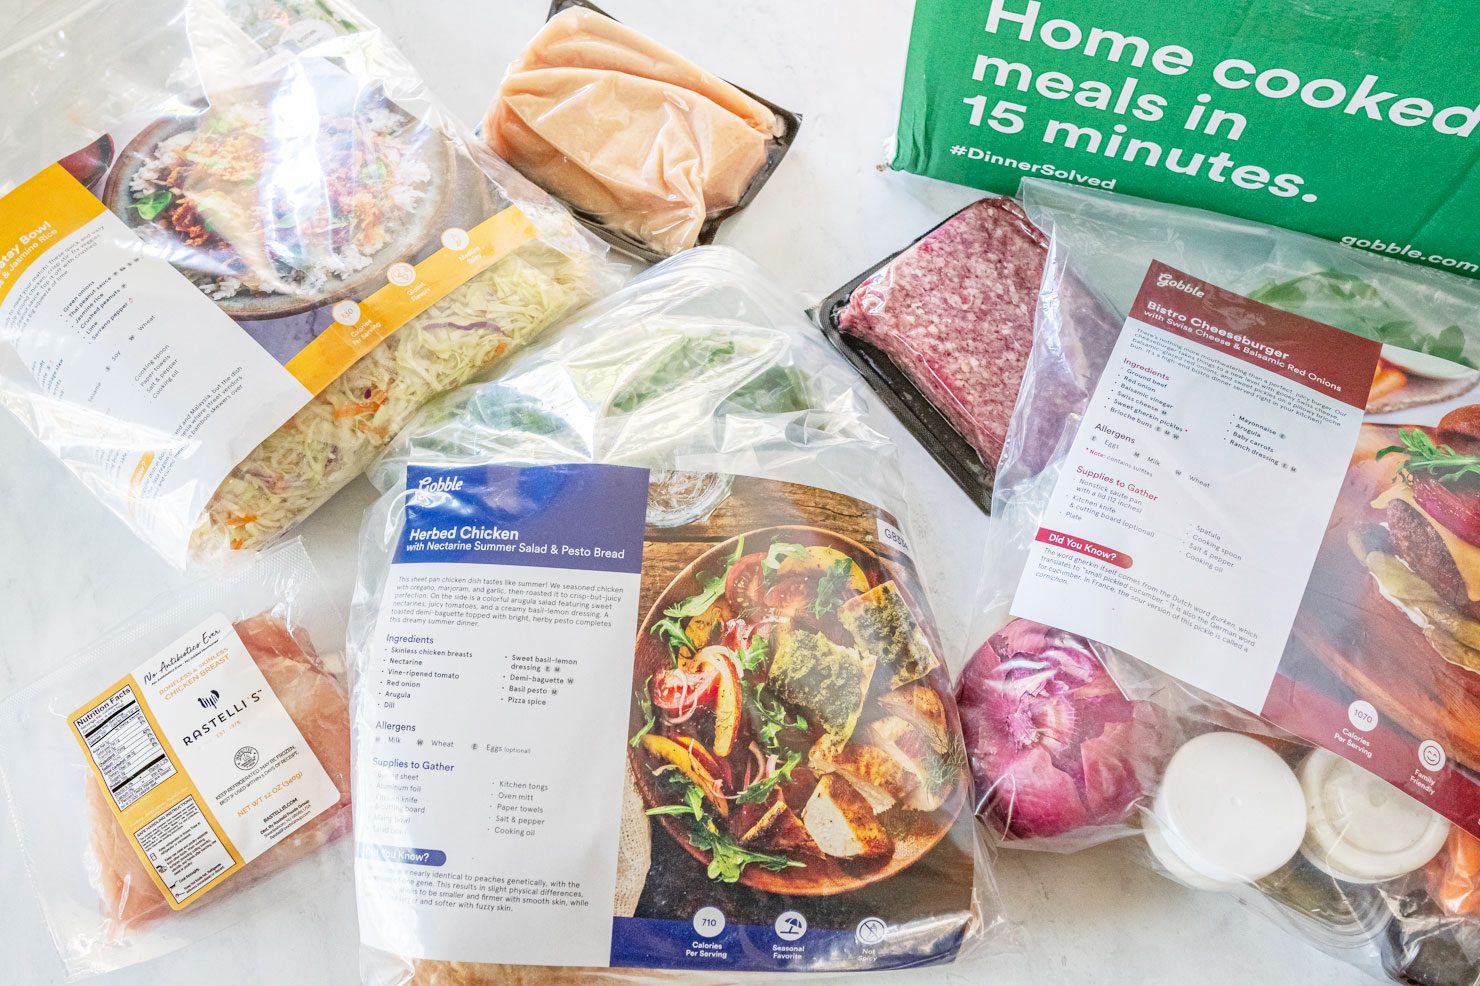 How Home Meal Kits Are Making Family Dinner Easy